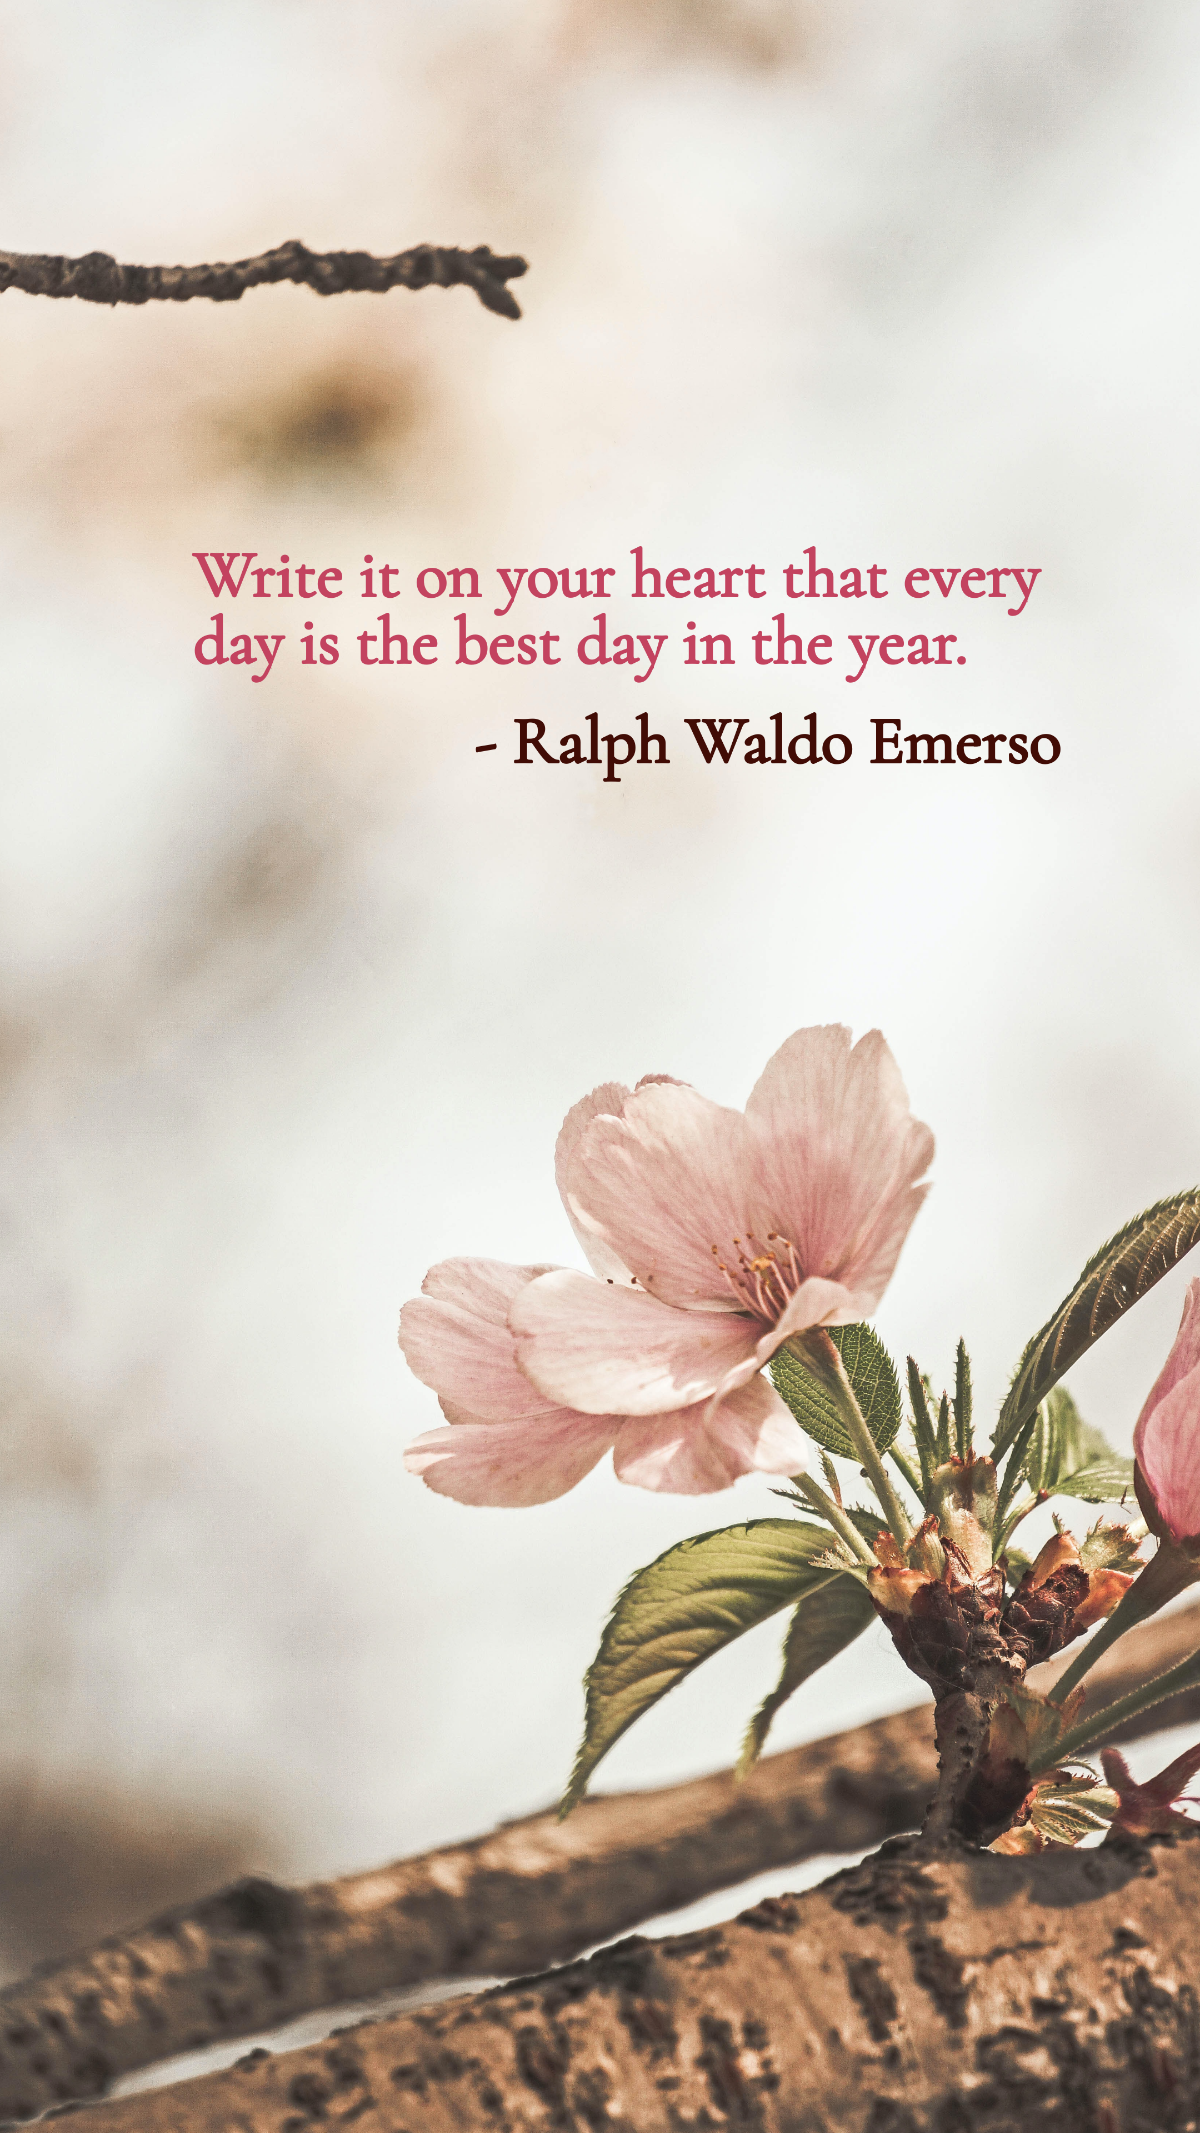 Write it on your heart that every day is the best day in the year. Template